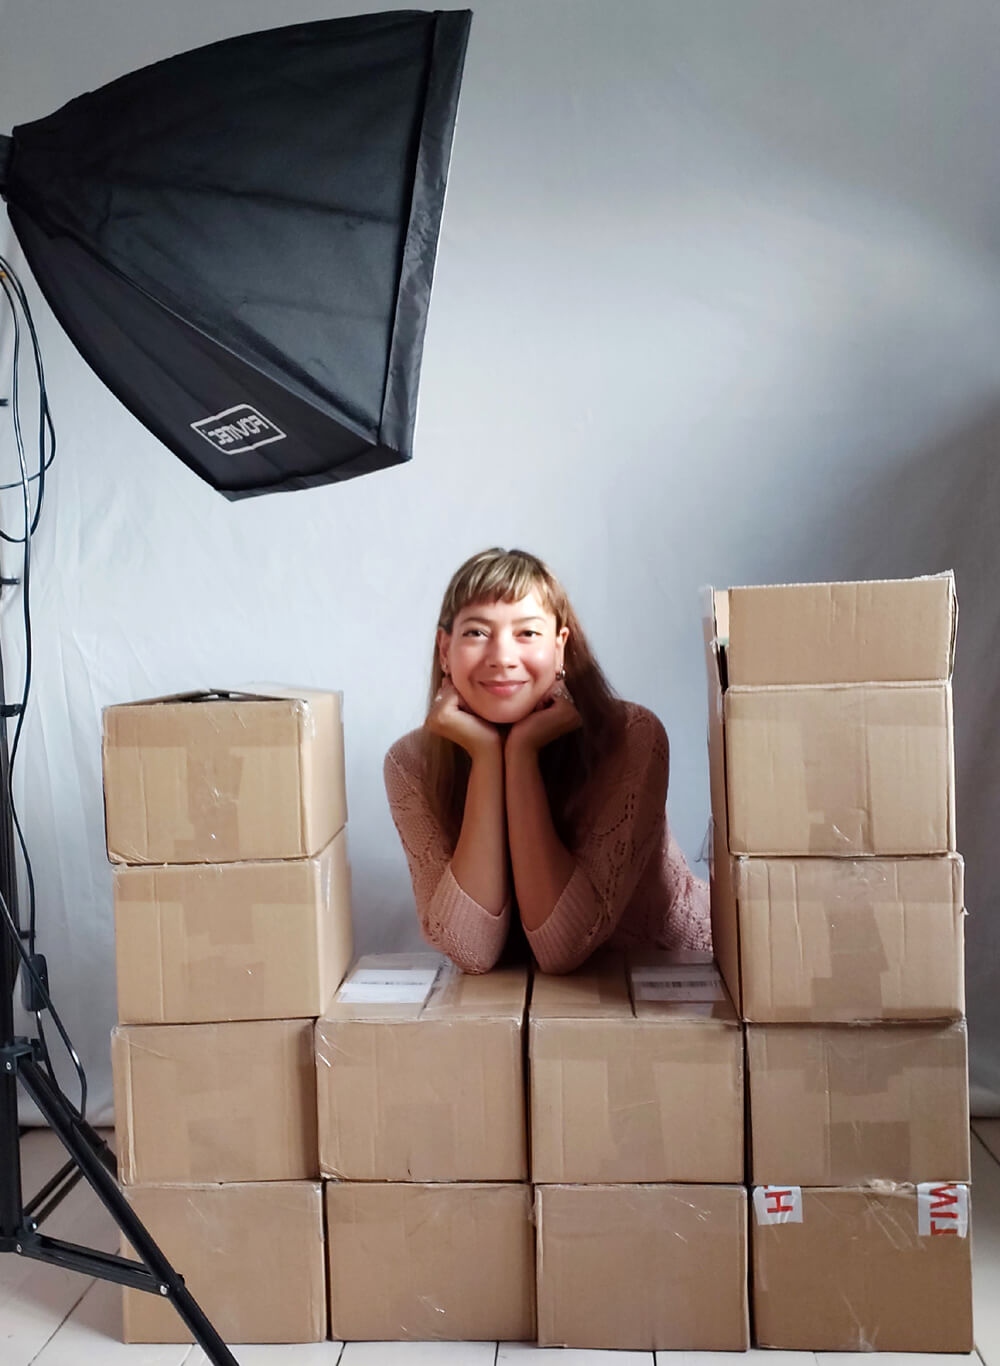 Anna-Christina from Music Audio Stories, unboxing picture books